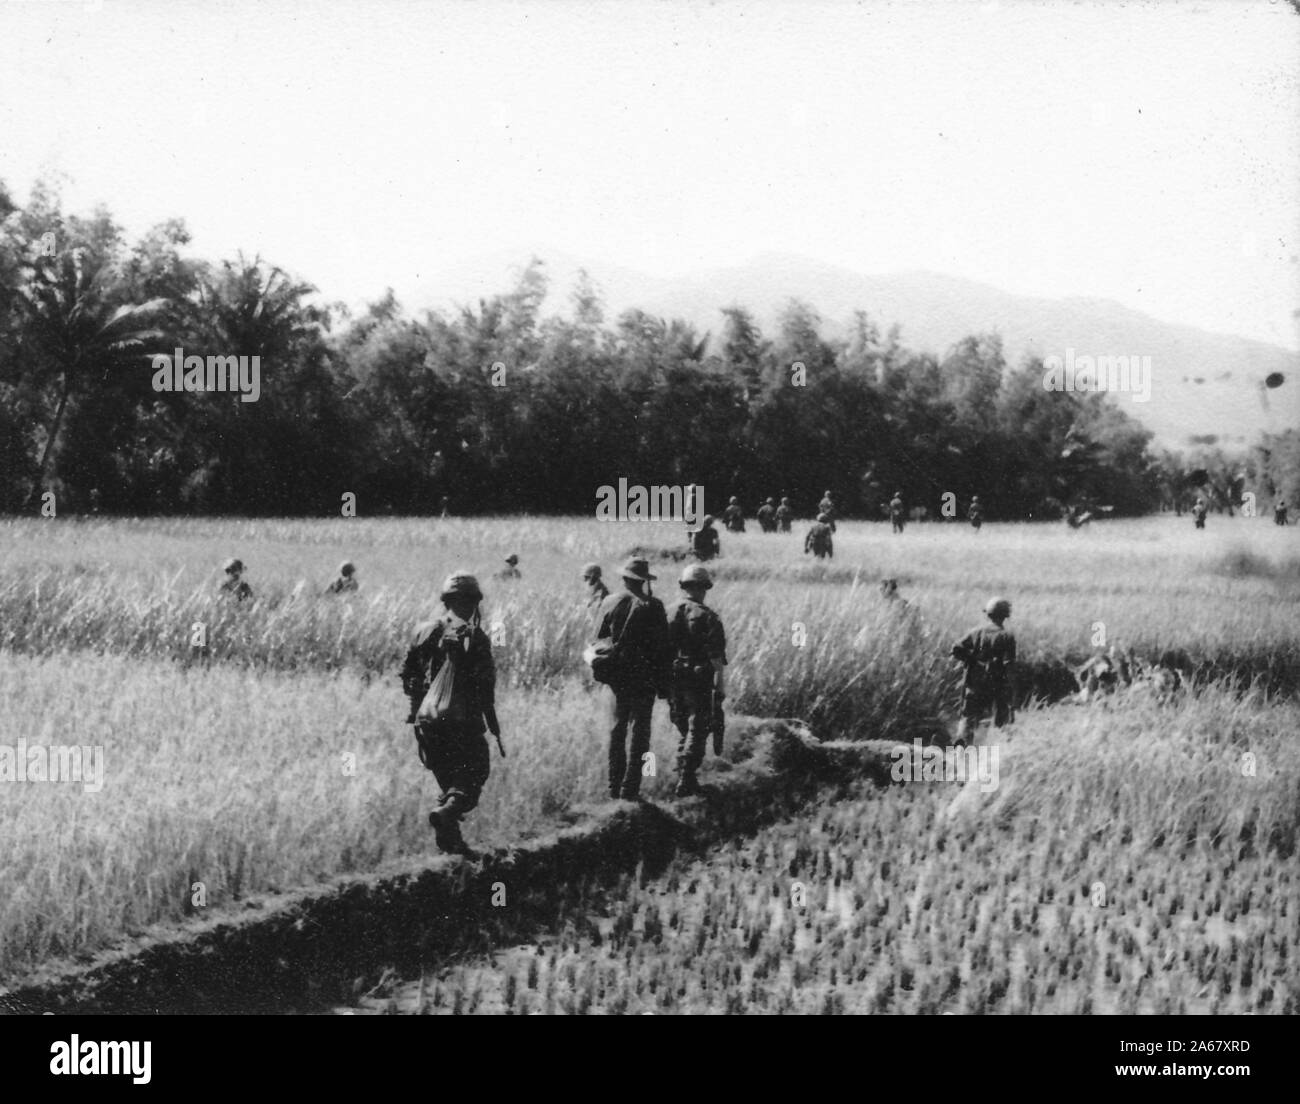 Wide shot of American servicemen, from the back, walking in single file through a field with tall grasses or rice plants on a sunny day, Vietnam, 1965. () Stock Photo